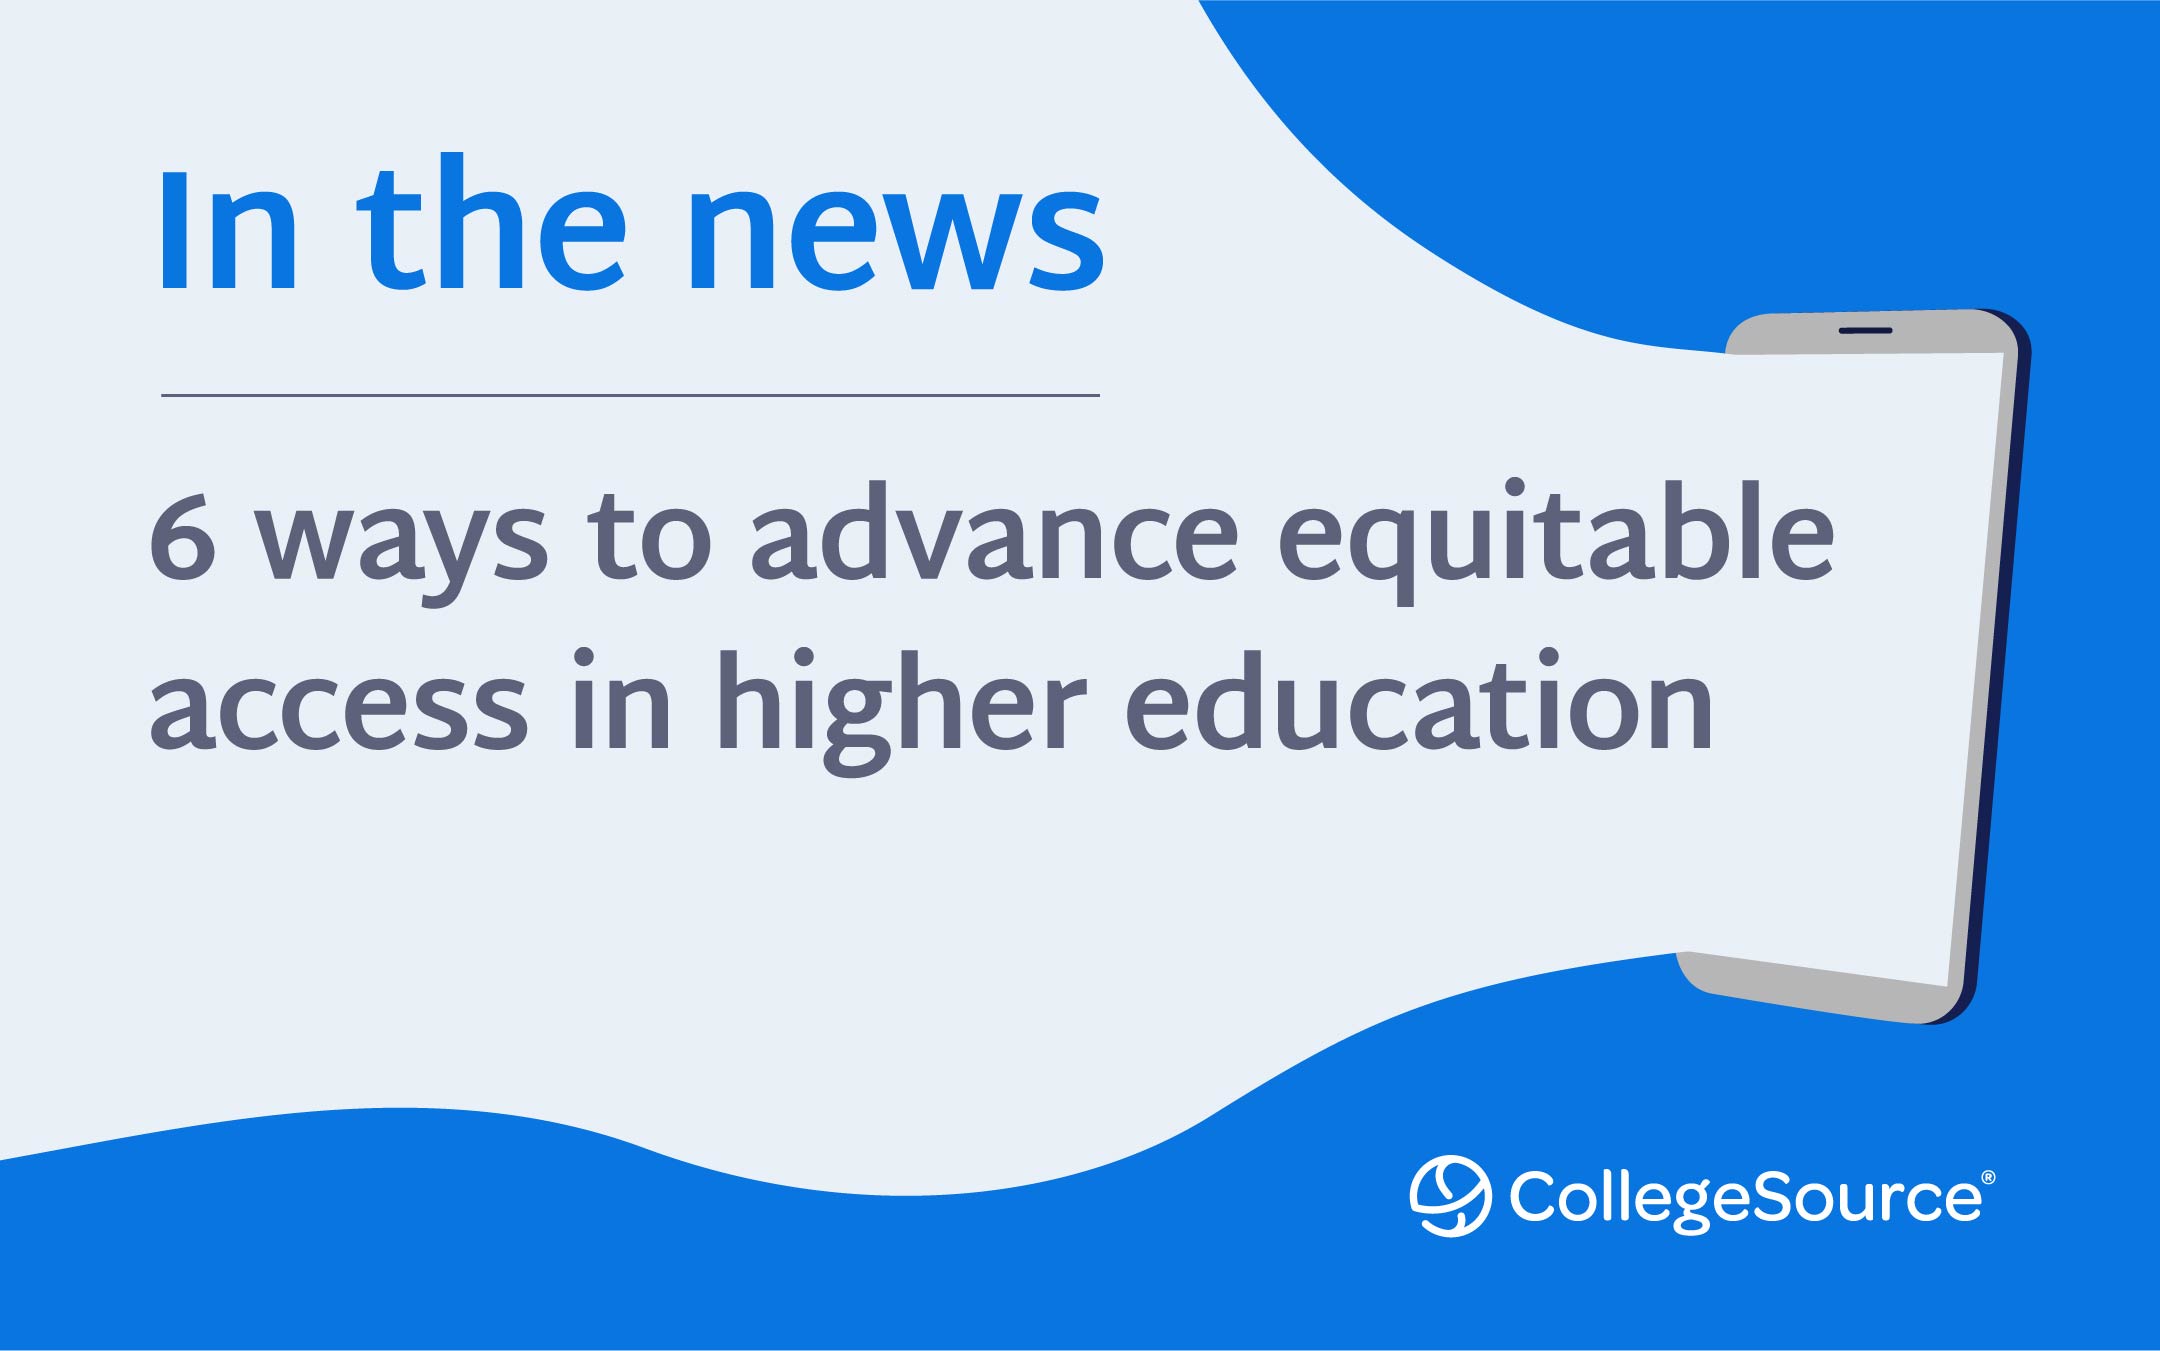 in-the-news-6-ways-advance-equitable-higher-ed-access